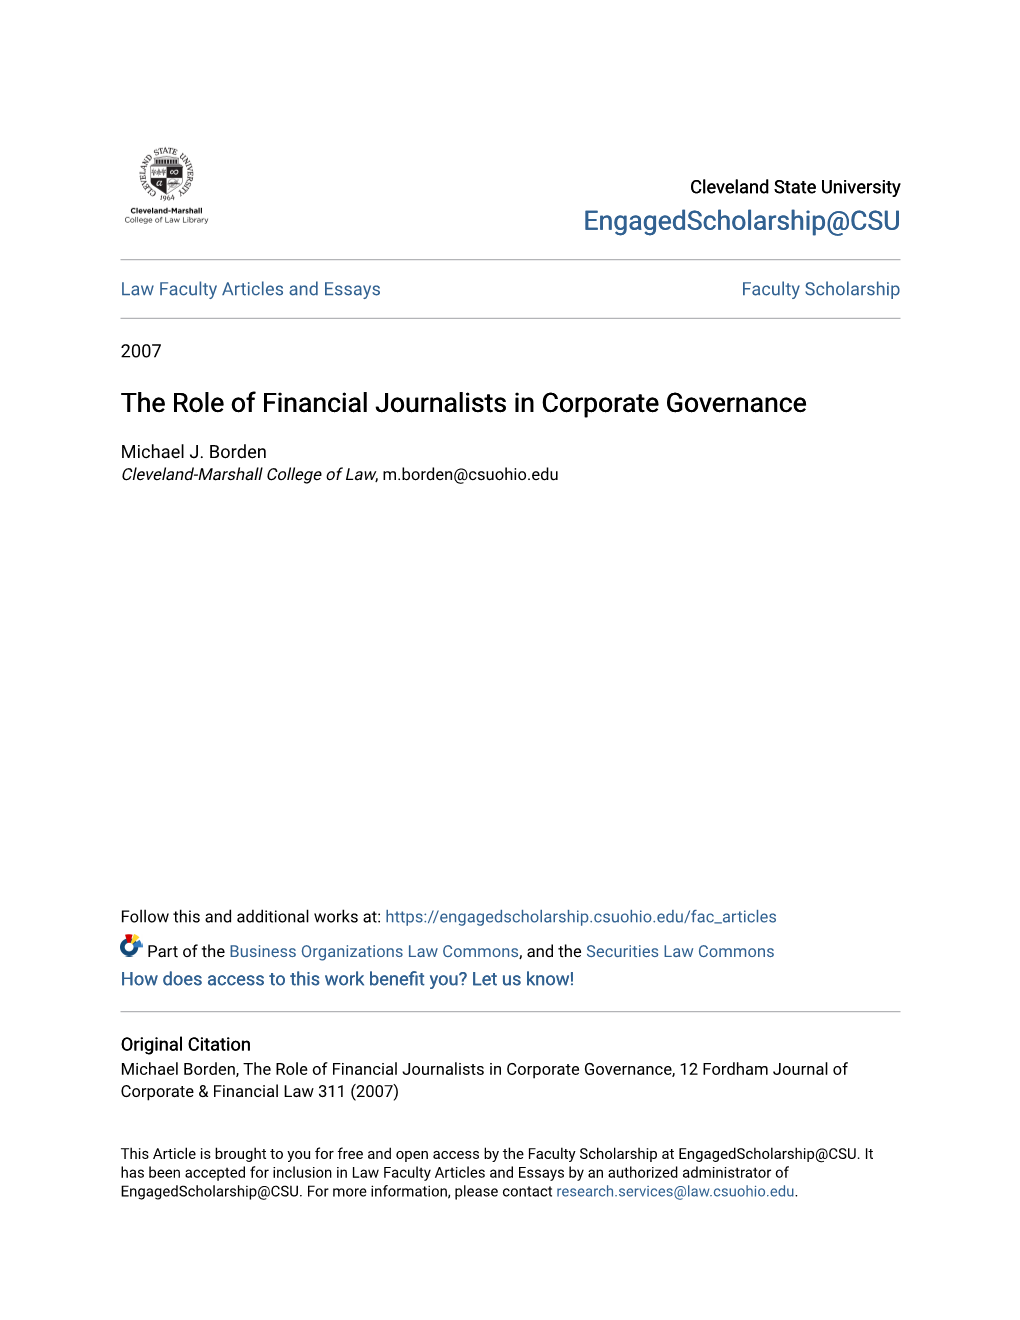 The Role of Financial Journalists in Corporate Governance